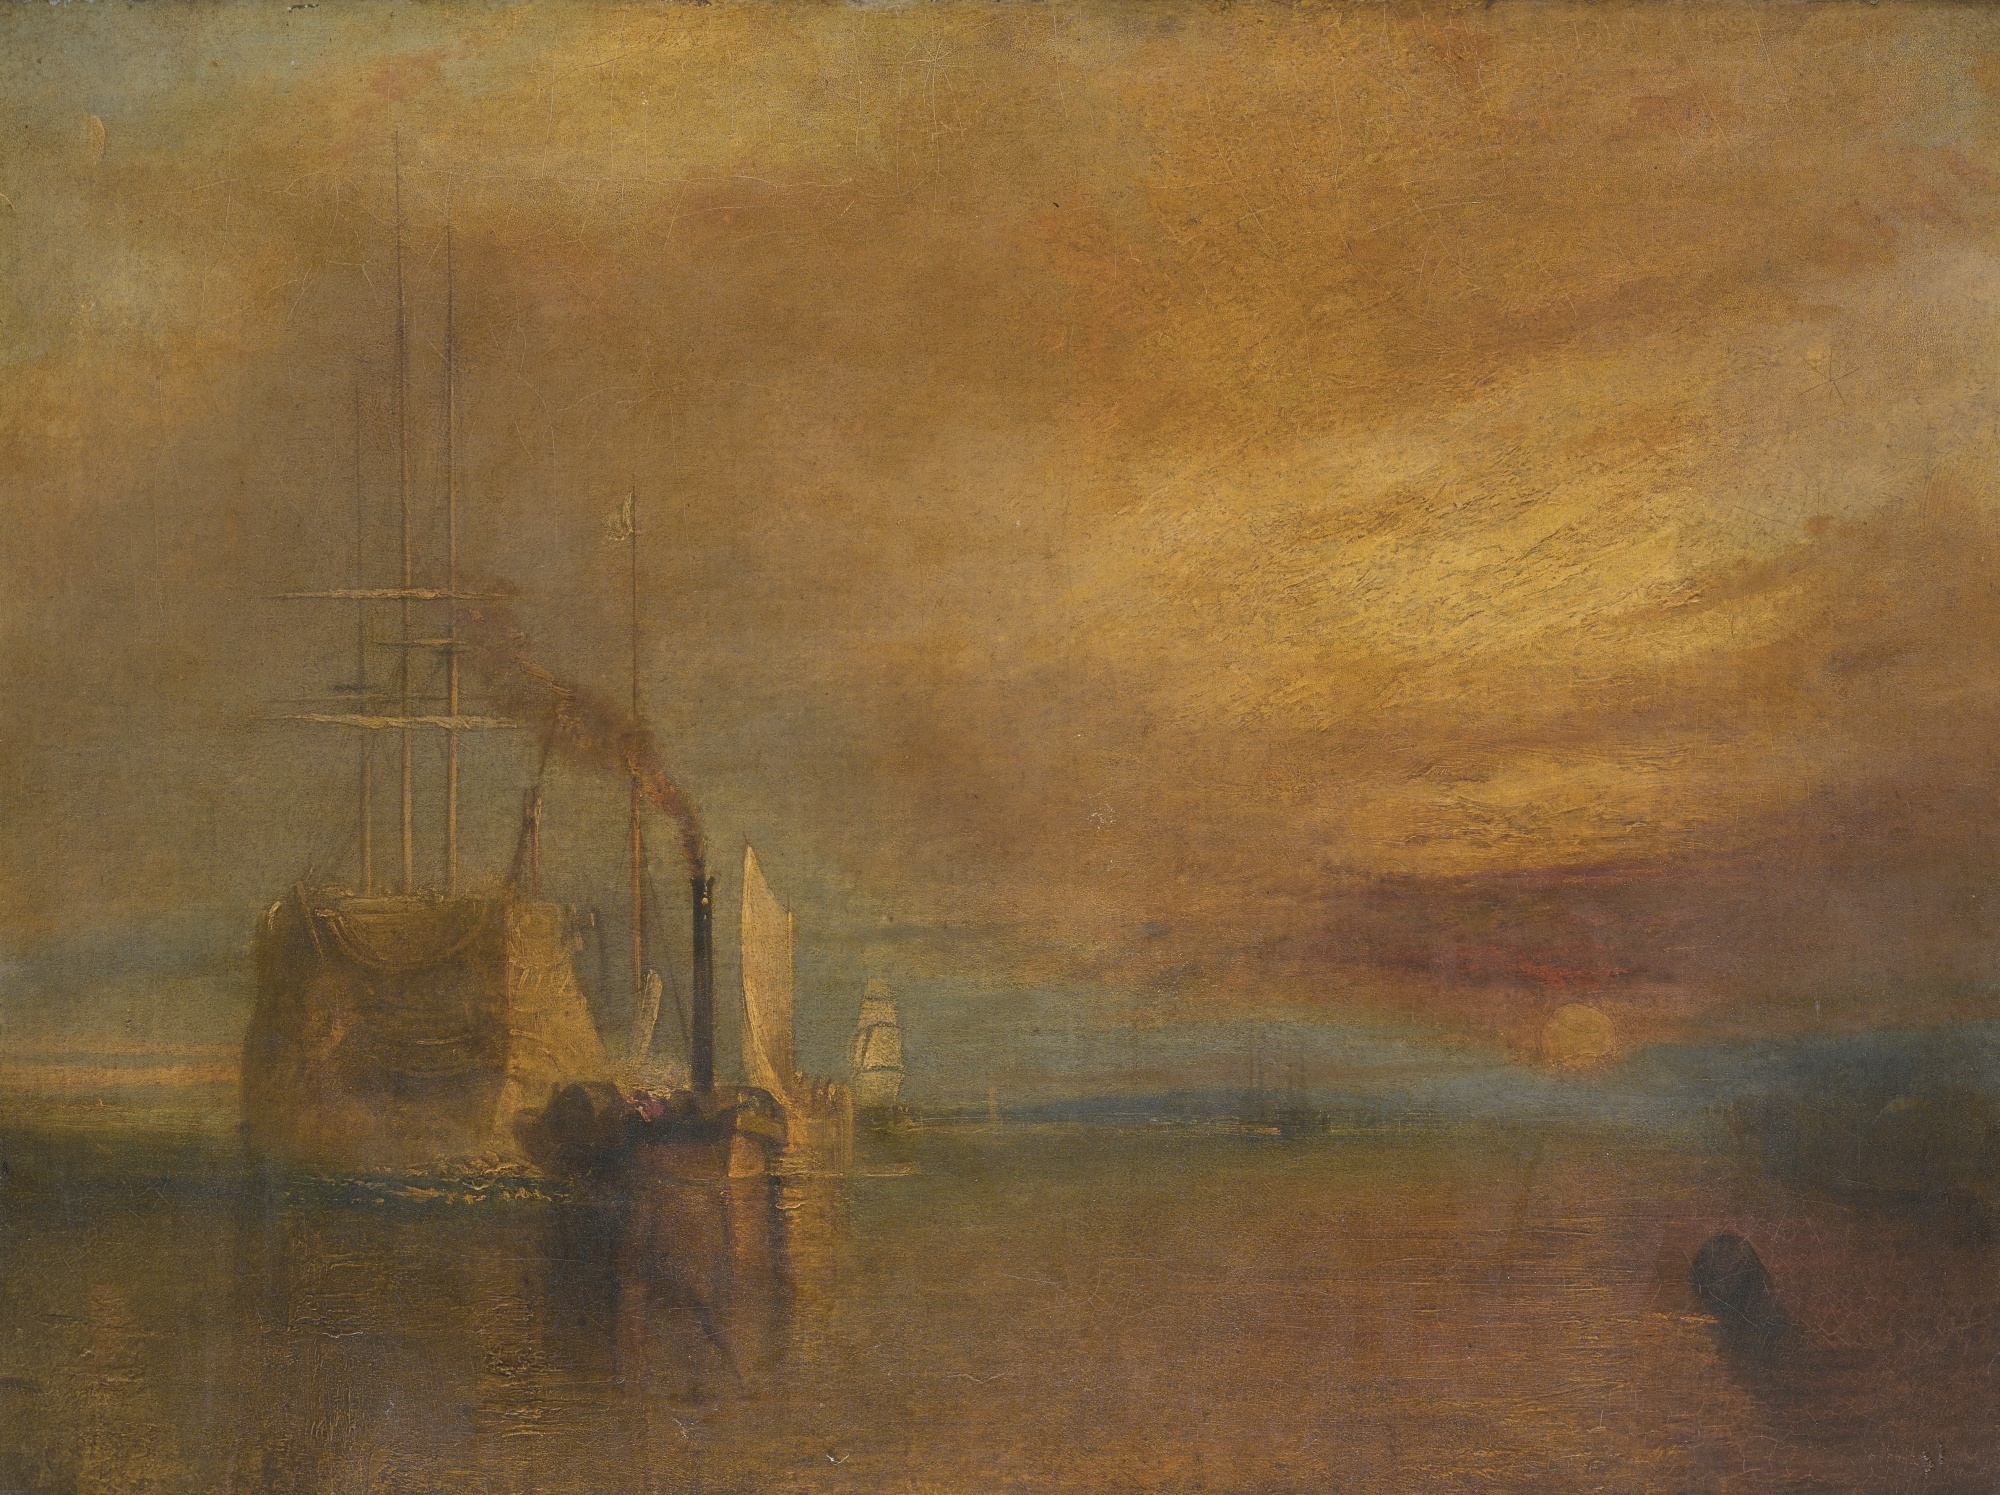 THE FIGHTING TEMERAIRE by Joseph Mallord William Turner